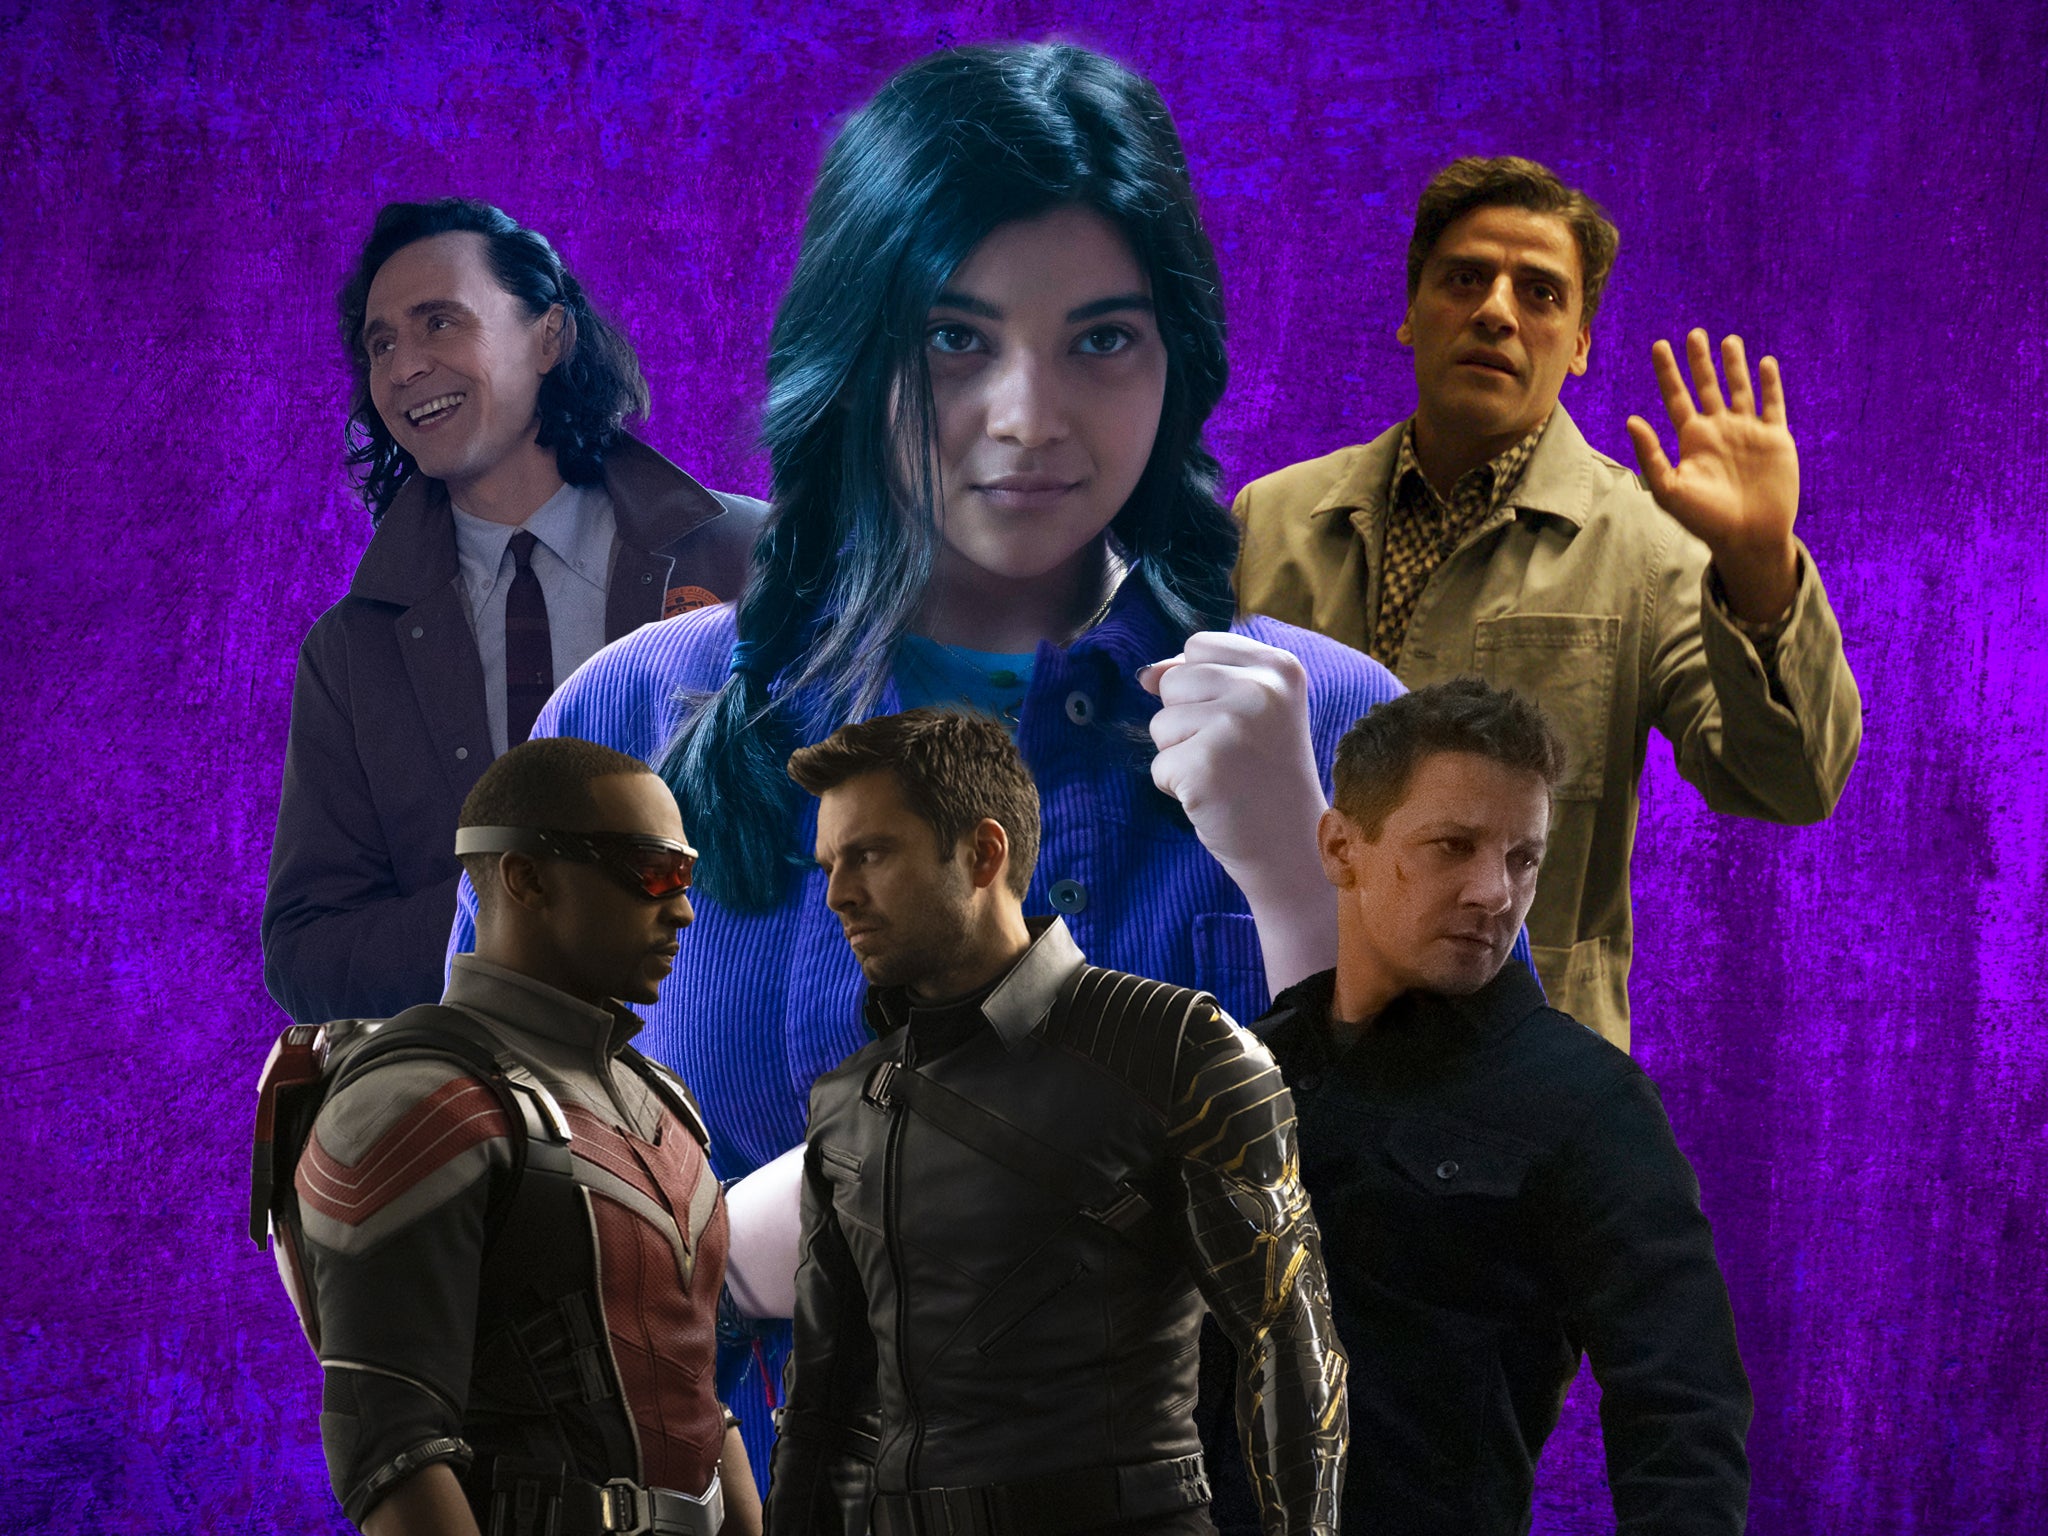 Streaming superheroes: the stars of ‘Loki’, ‘The Falcon and the Winter Soldier’, ‘Ms Marvel’, ‘Hawkeye’ and ‘Moon Knight’